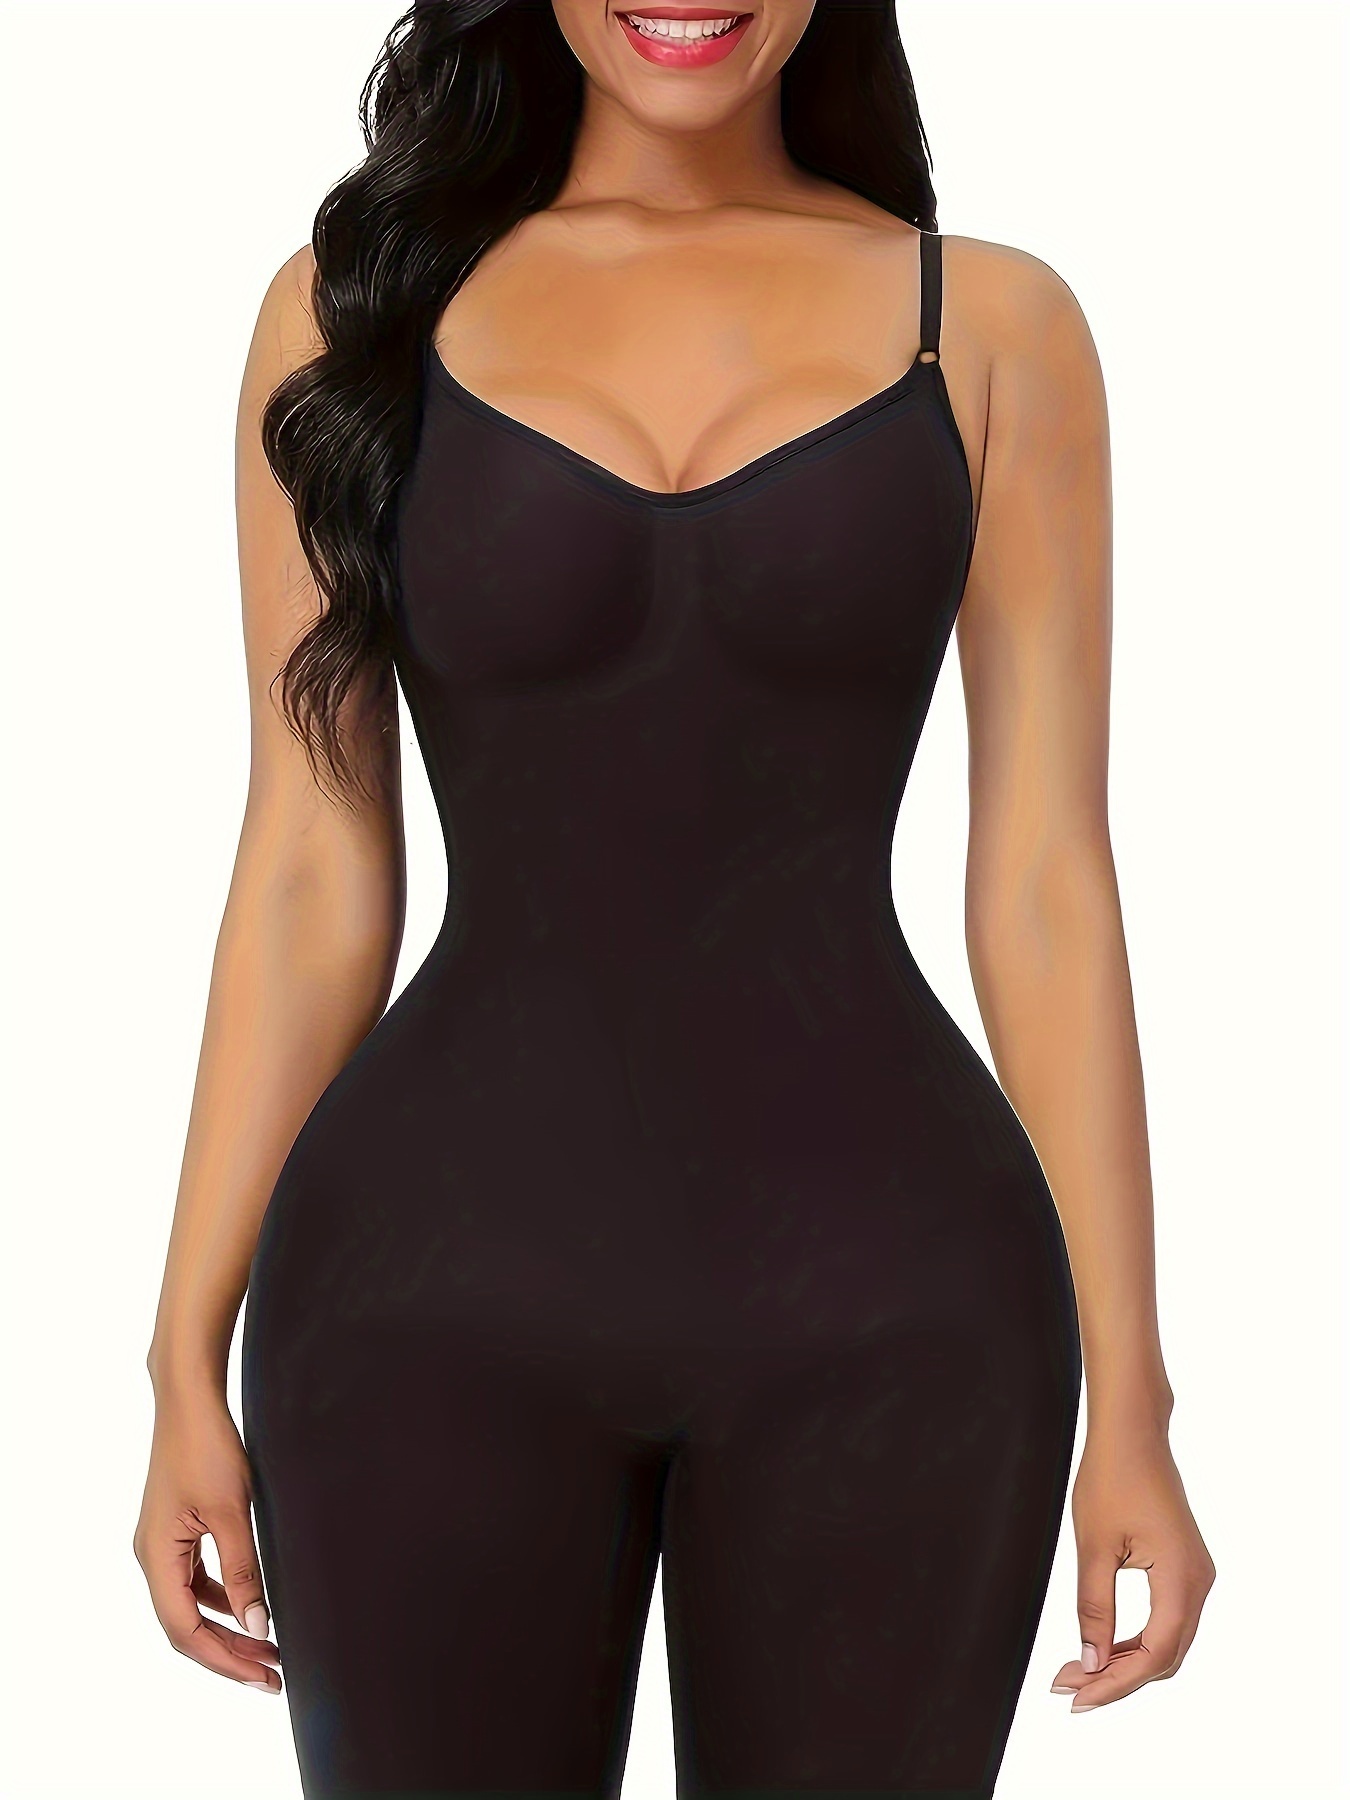 Full Body Klopp Shaper For Women Slimming Bodysuit With Open Crotch Corset  And Waist Trainer For Shaping And Underwear Postpar235P From Qljmw, $24.11